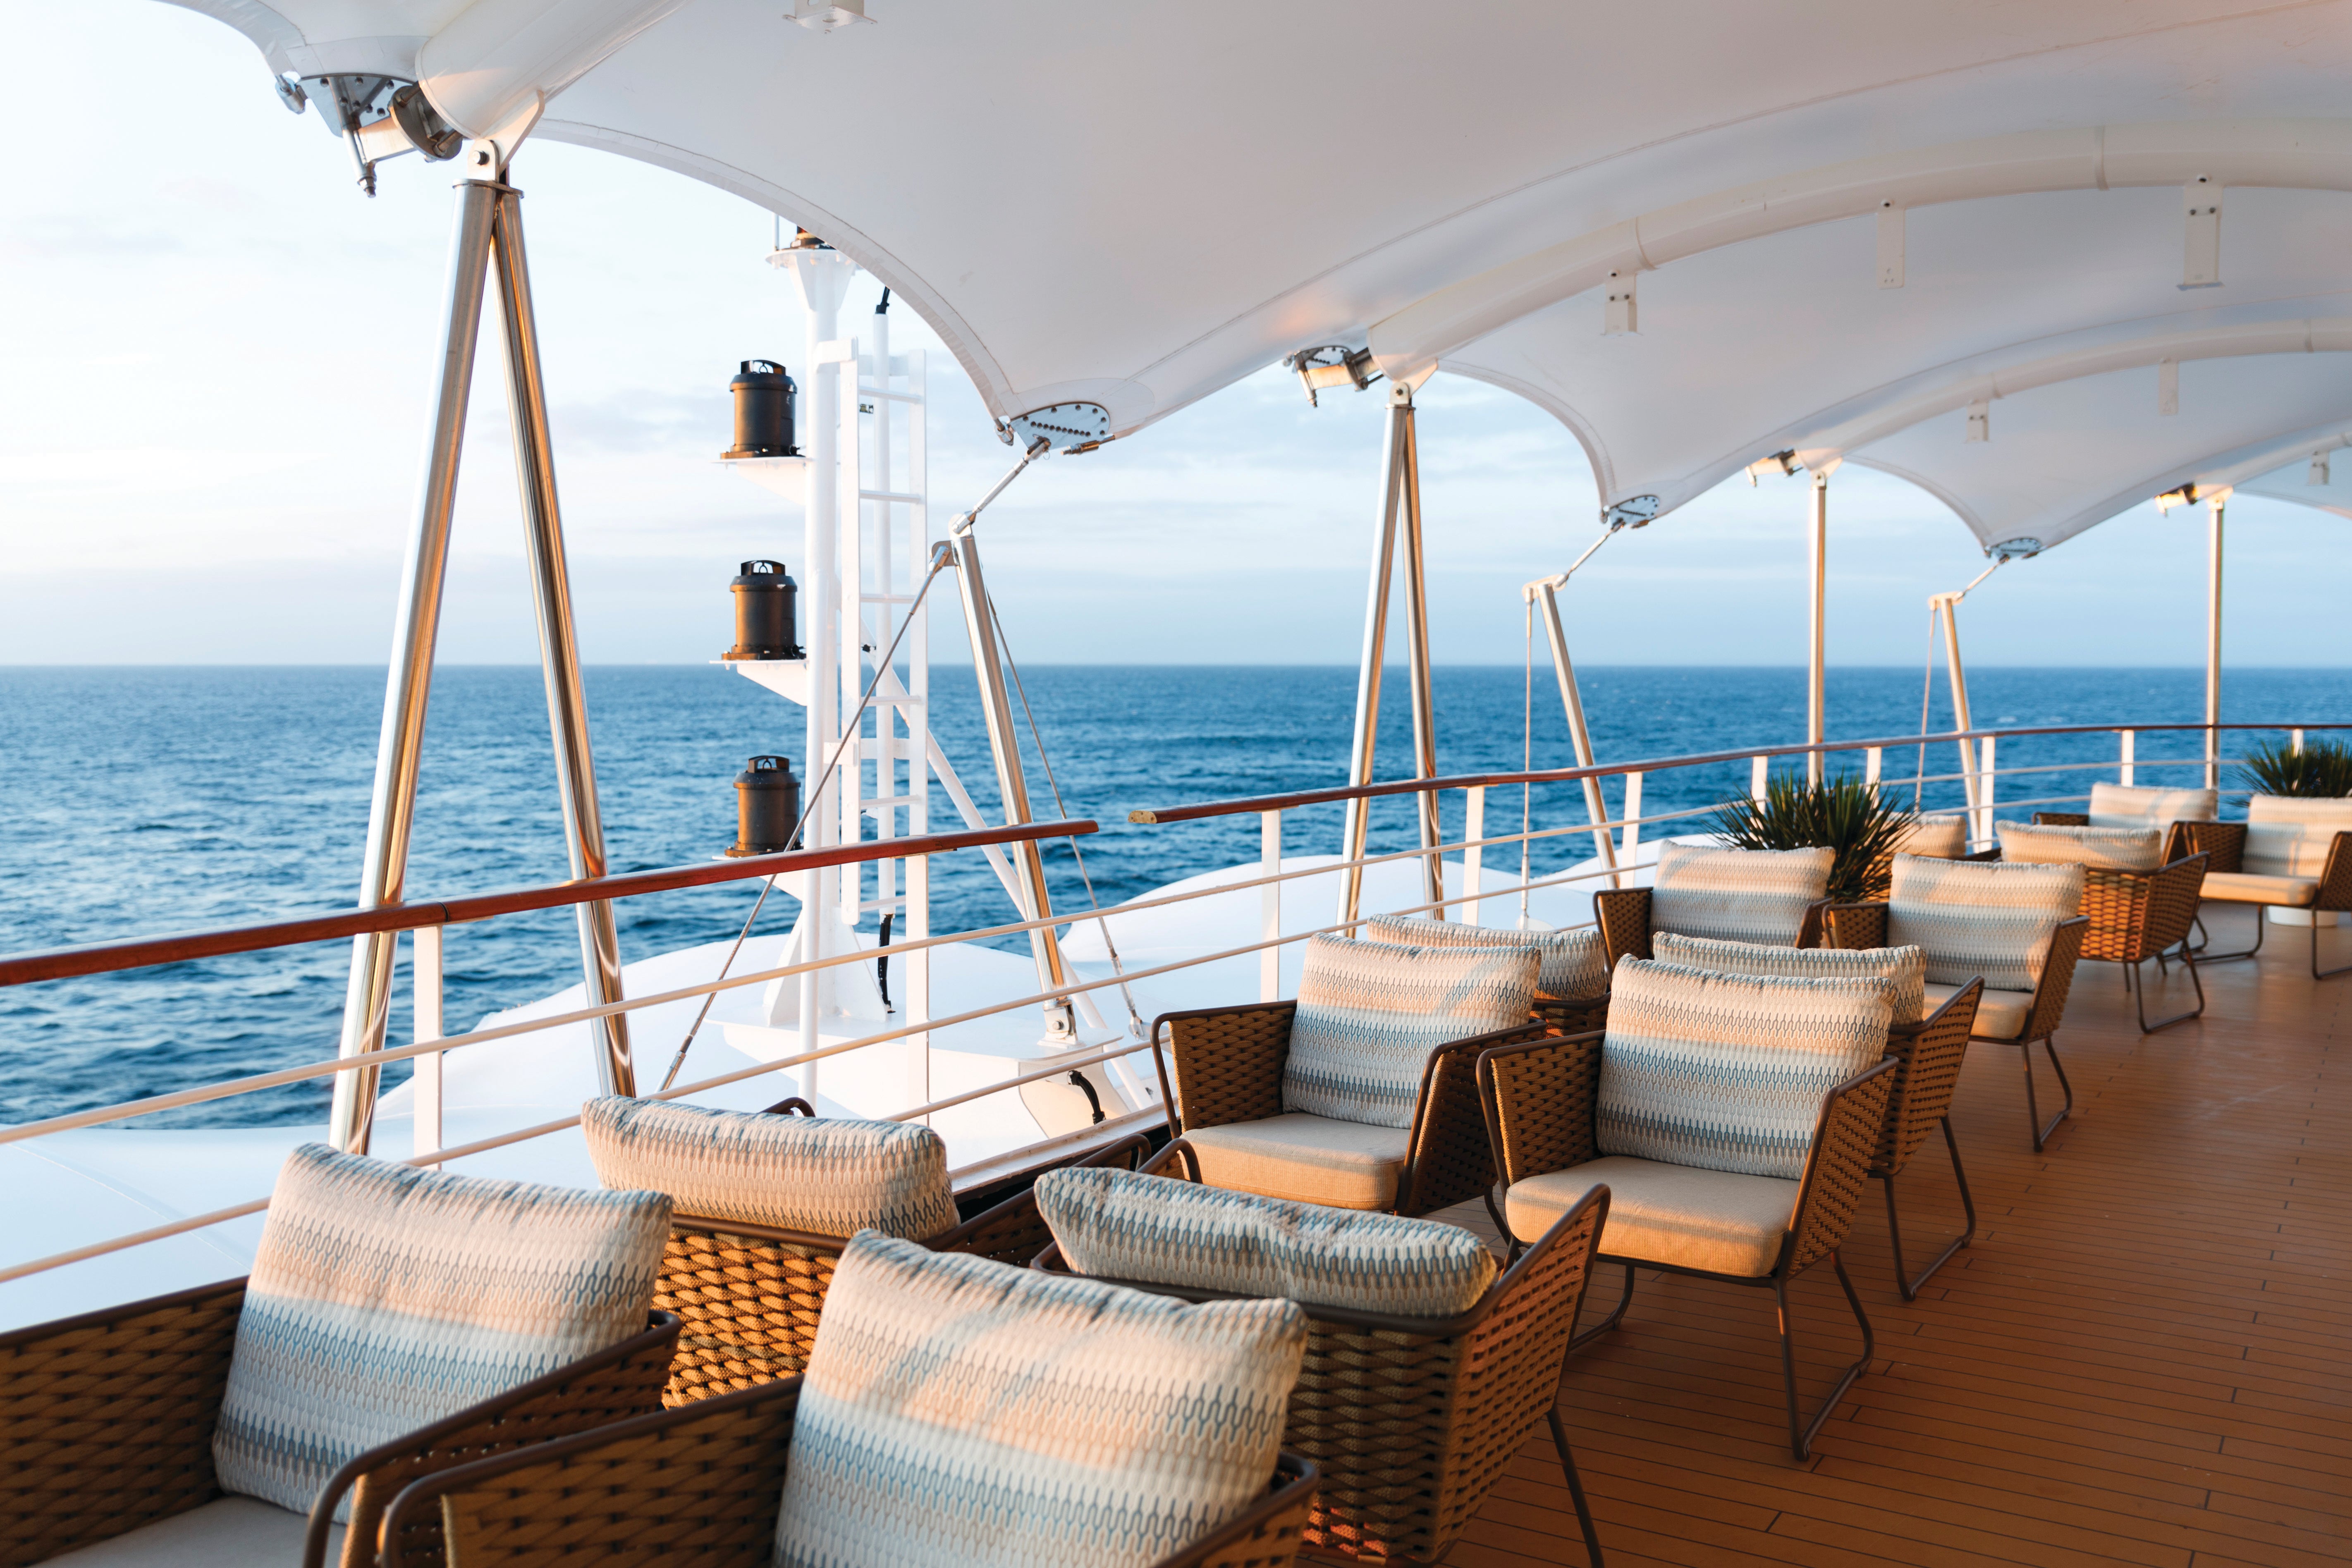 Silver Spirit is the epitome of seafaring indulgence